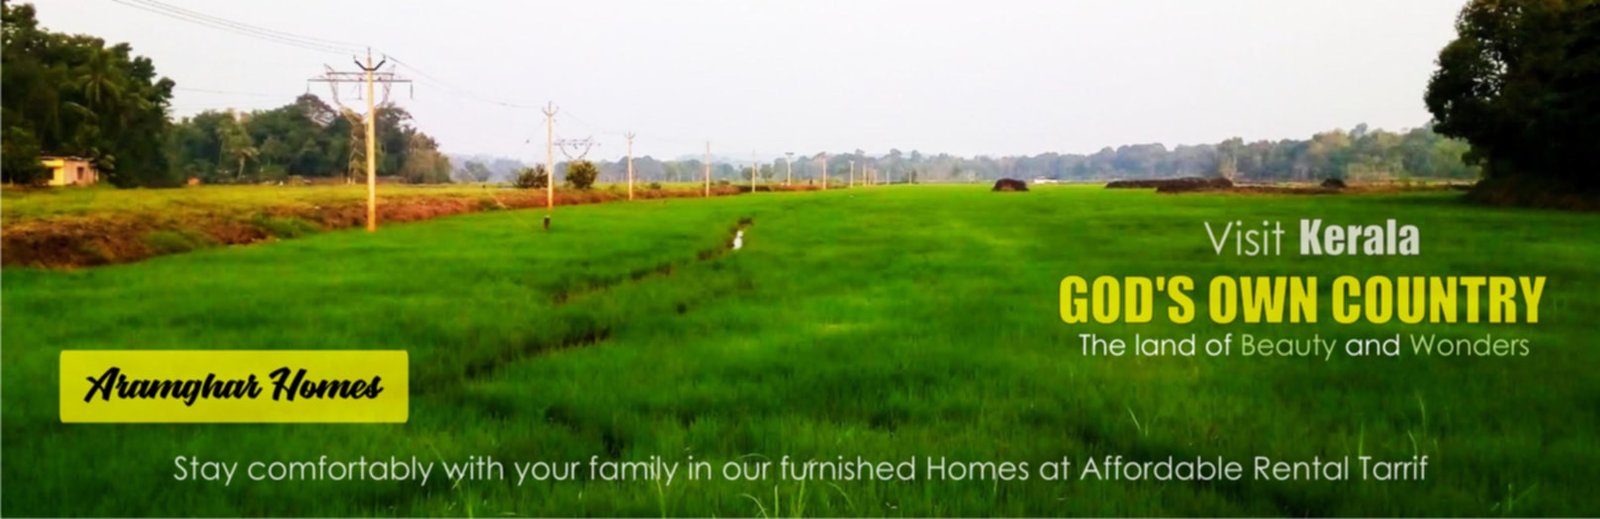 rent house for a month - Aramghar Homes